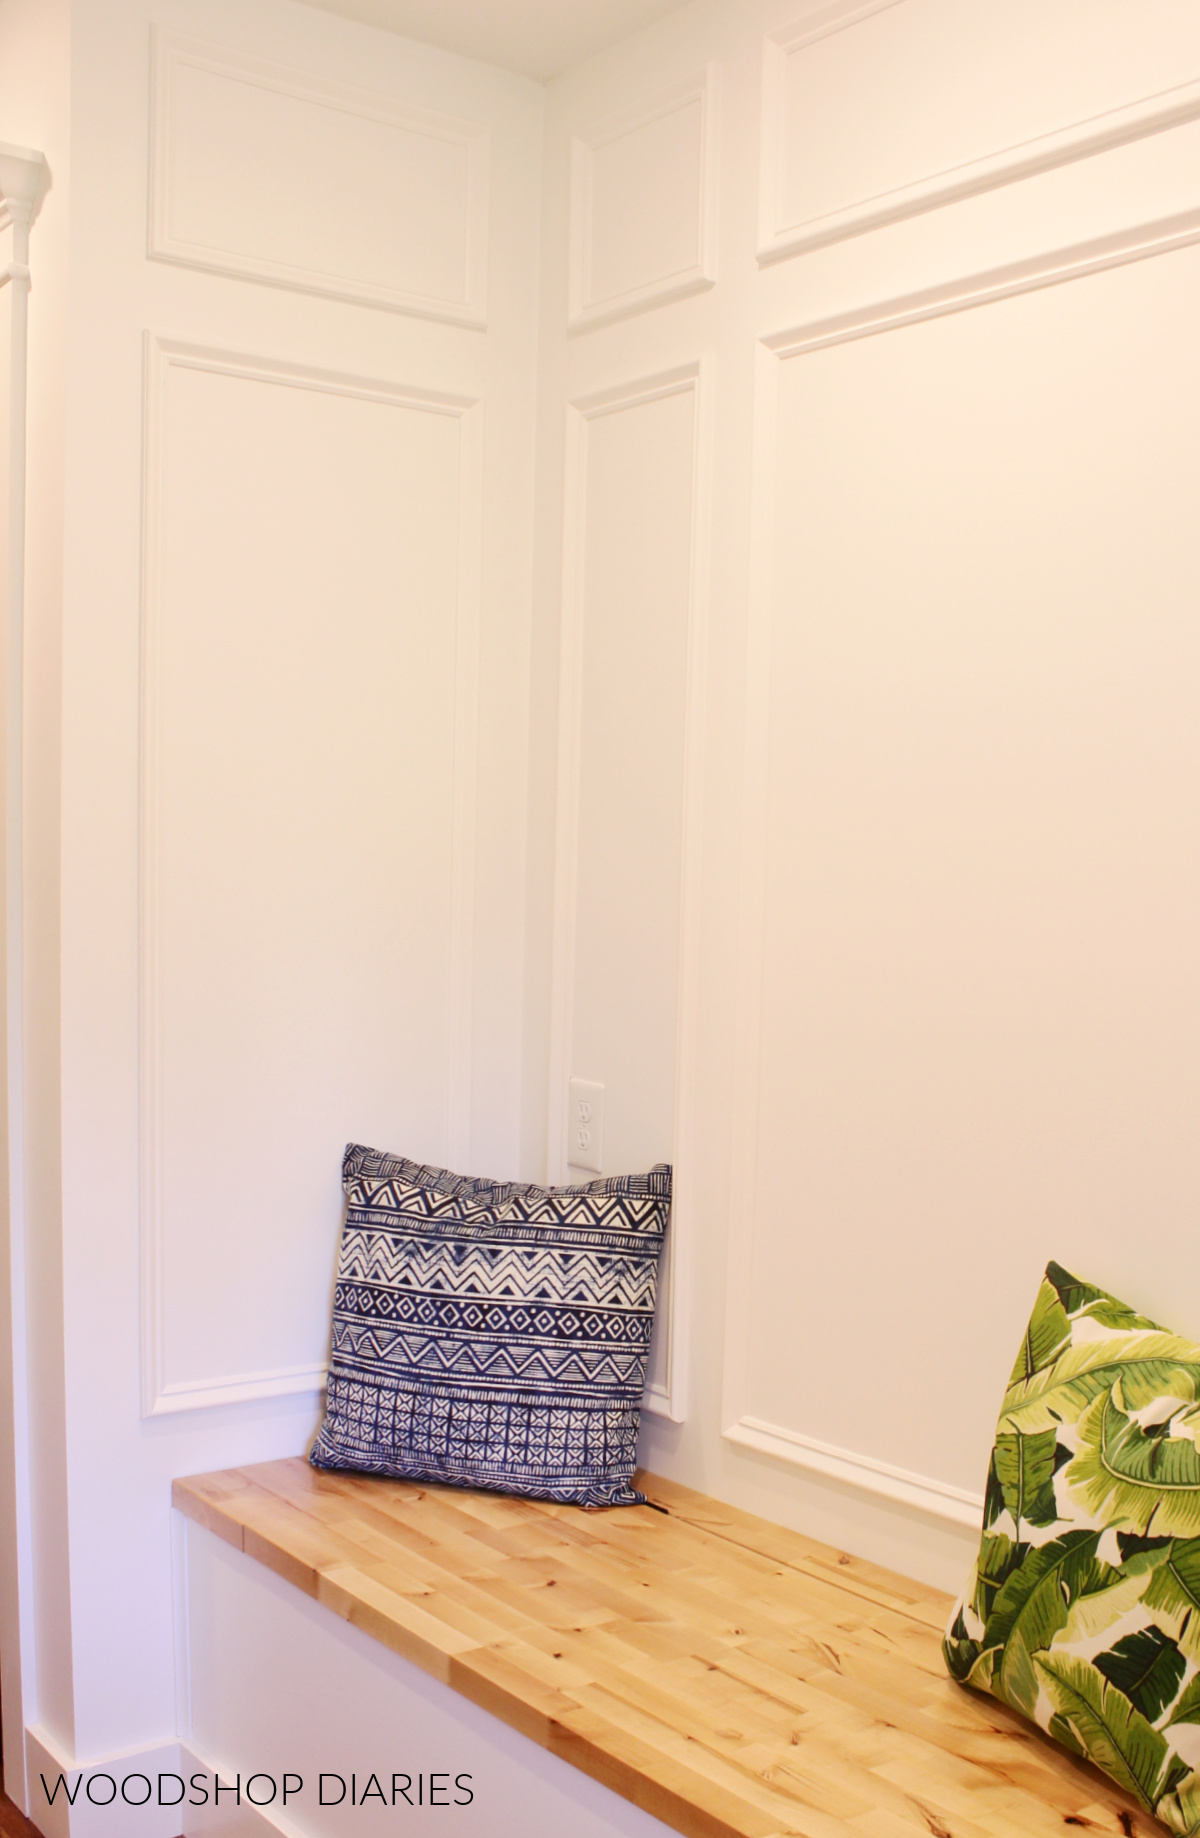 Completed DIY picture frame molding accent wall in built in bench nook painted white